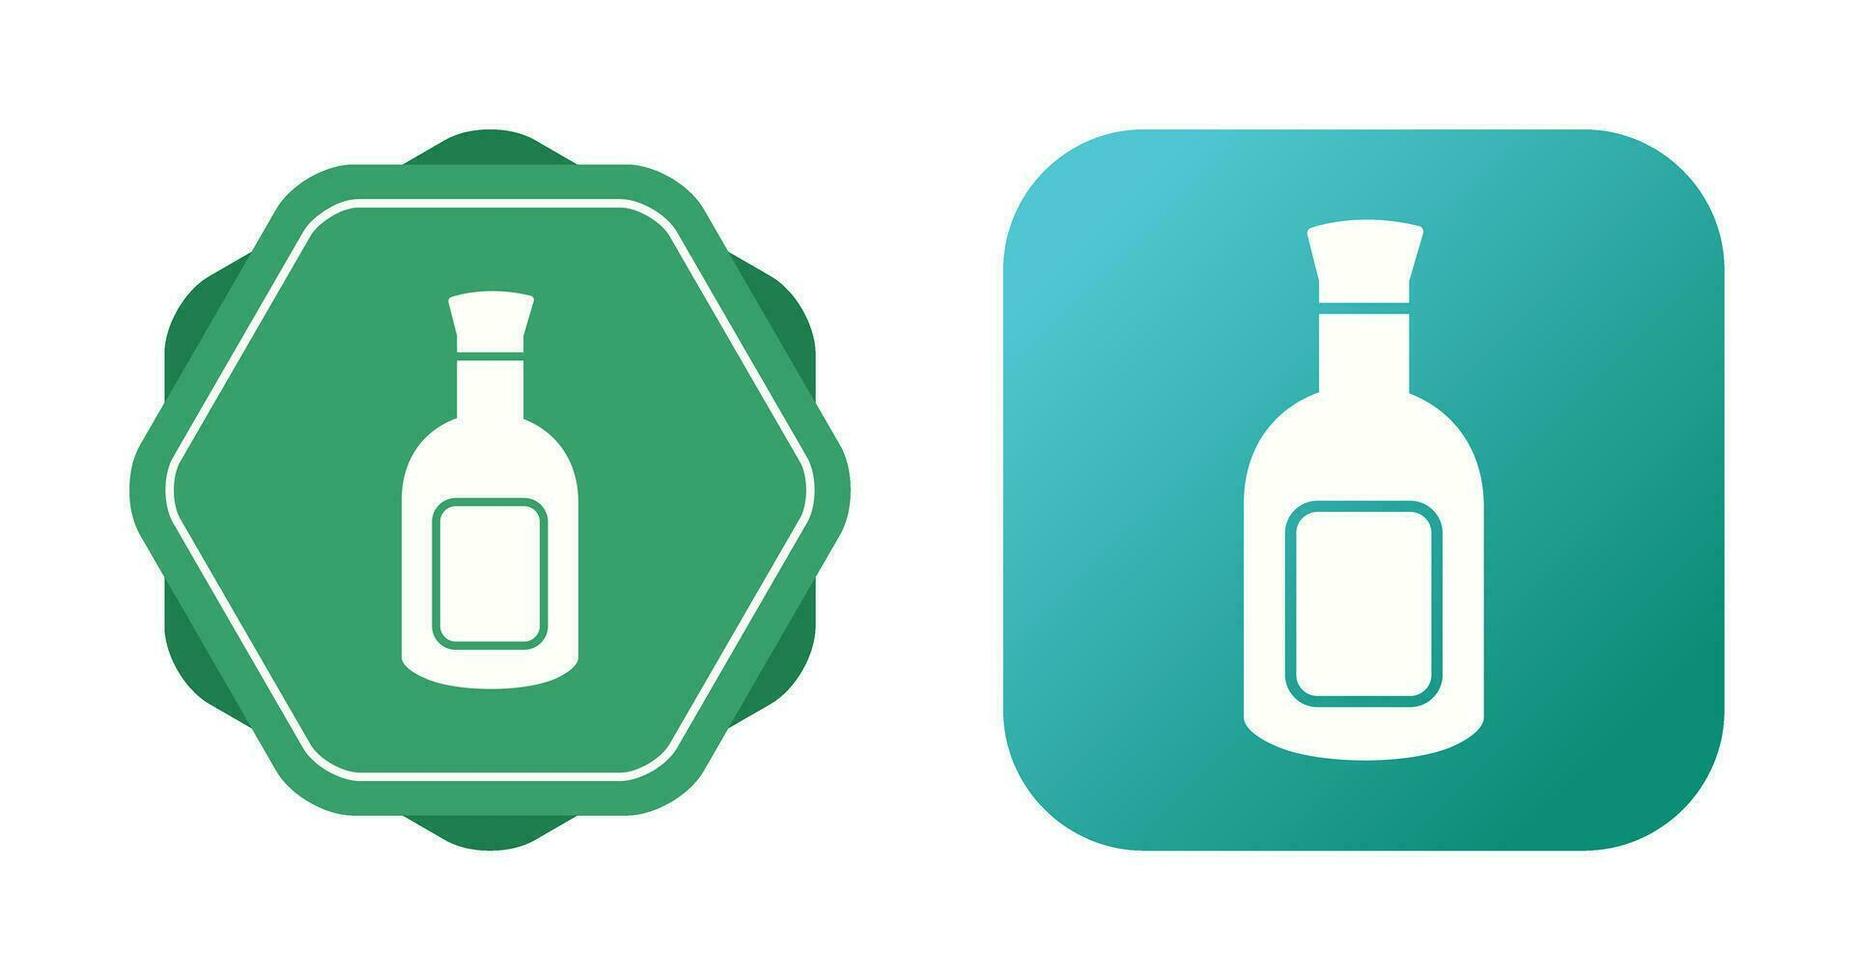 Drink Bottle Vector Icon